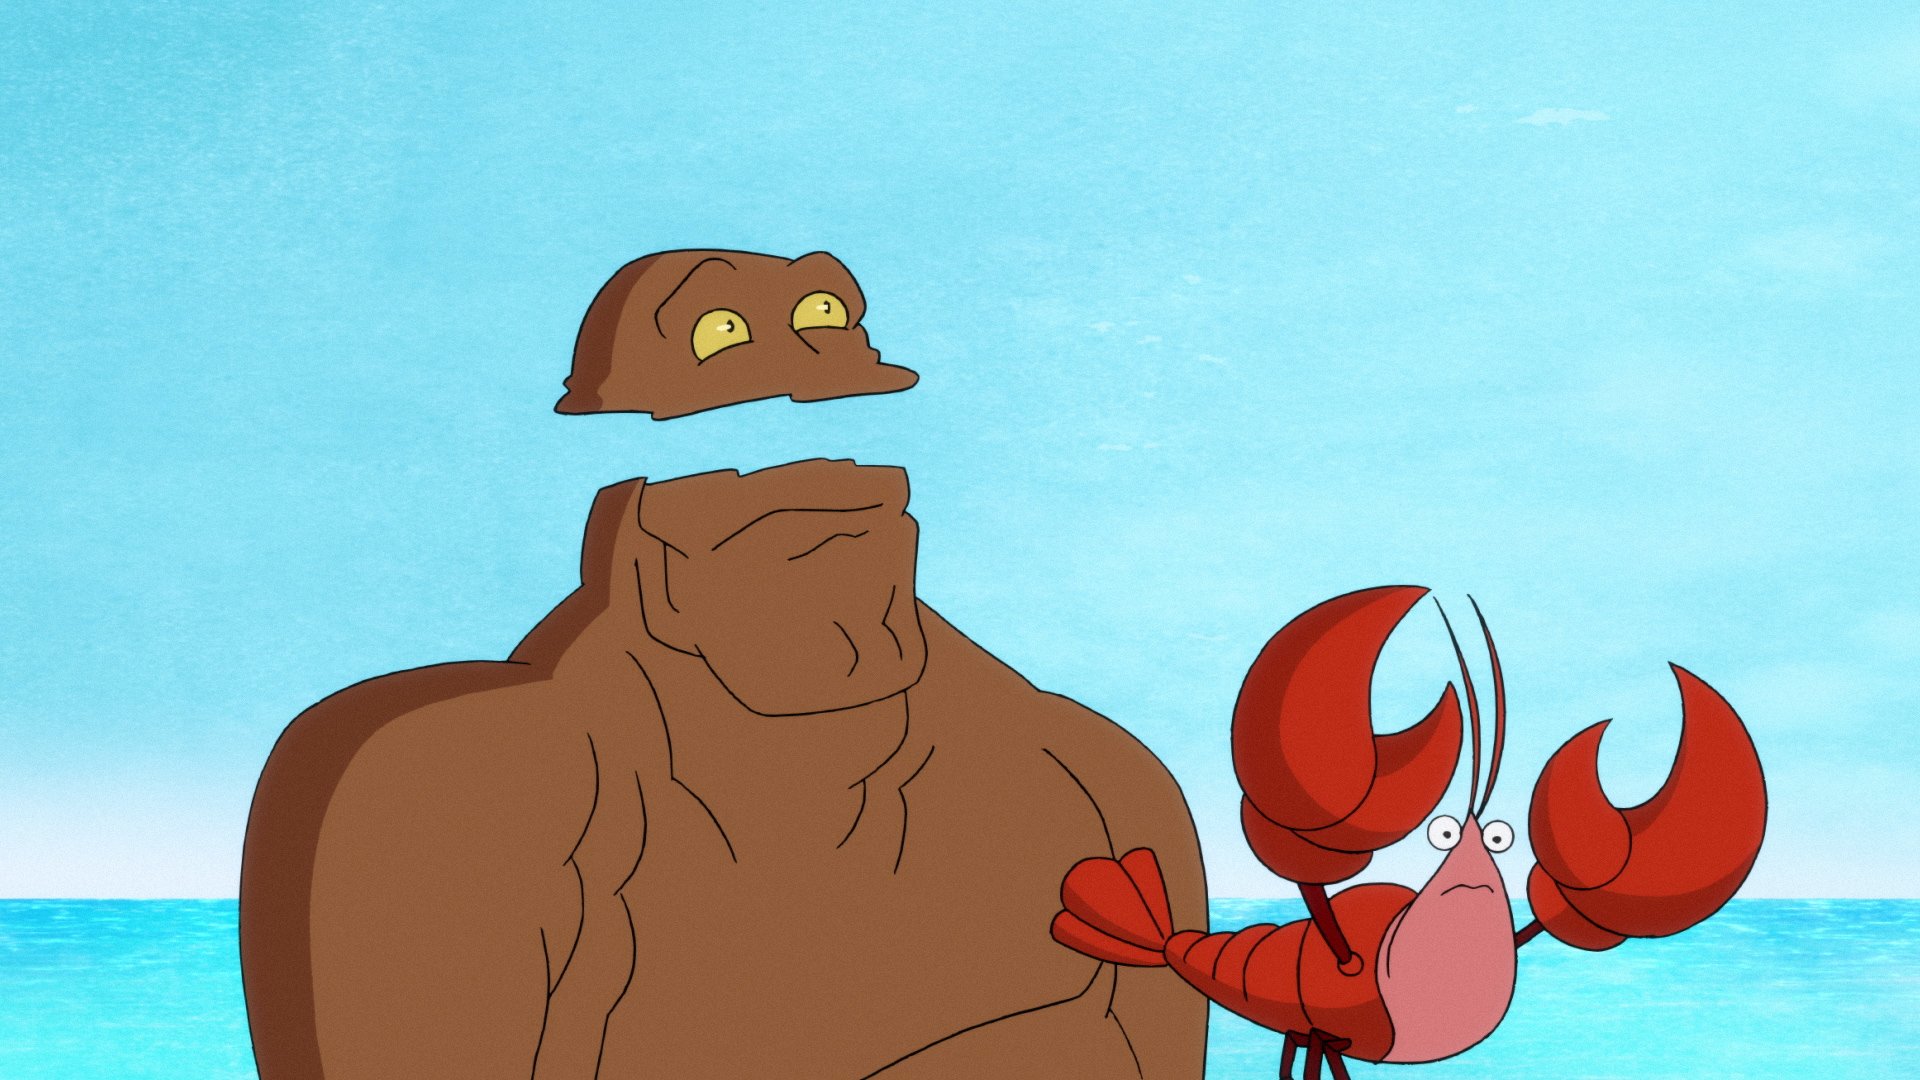 Clayman has a bit of a run-in with a lobster, 'Harley Quinn'